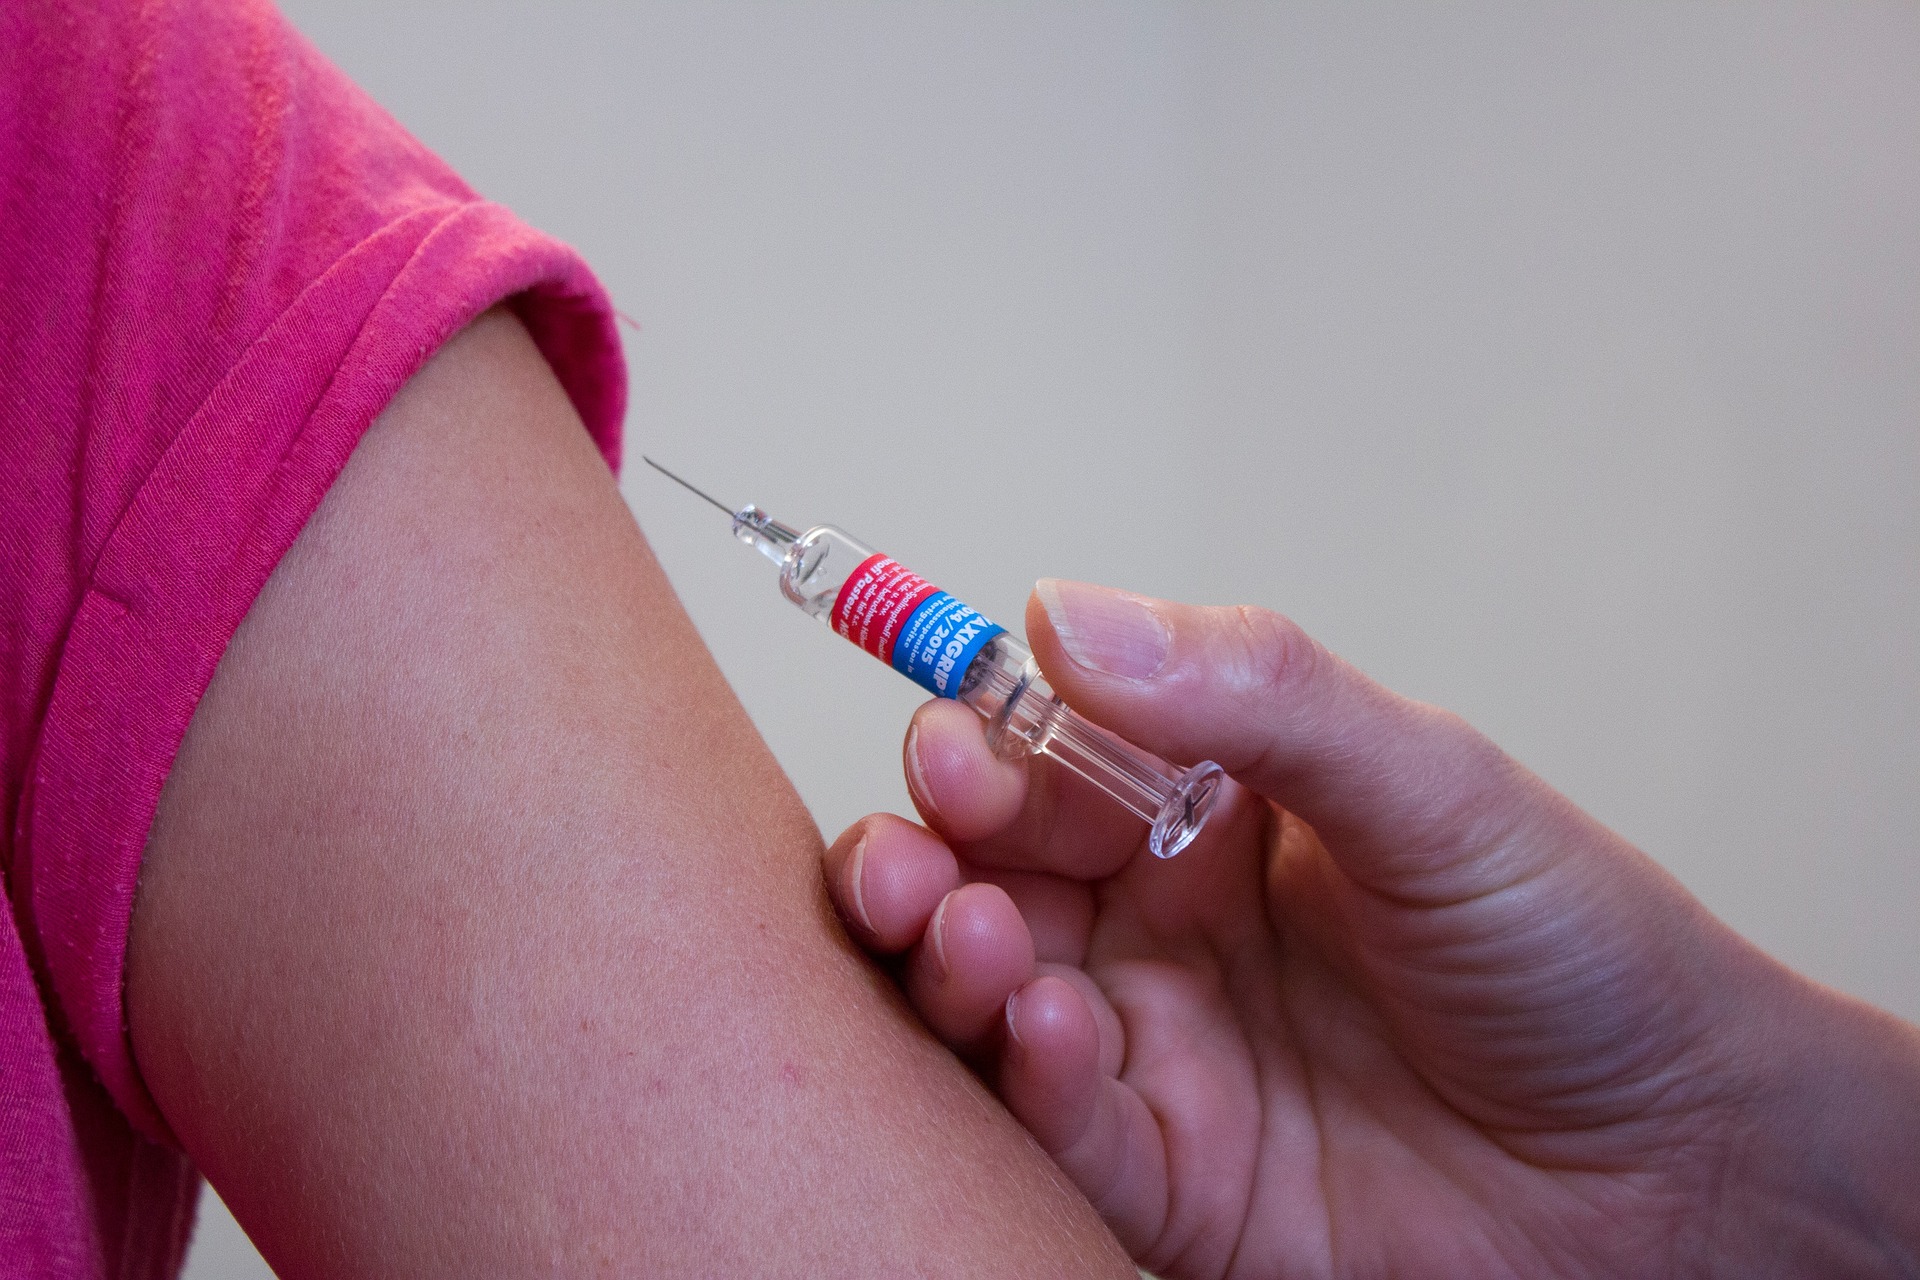 Trending: The resurgence of measles in the U.S.